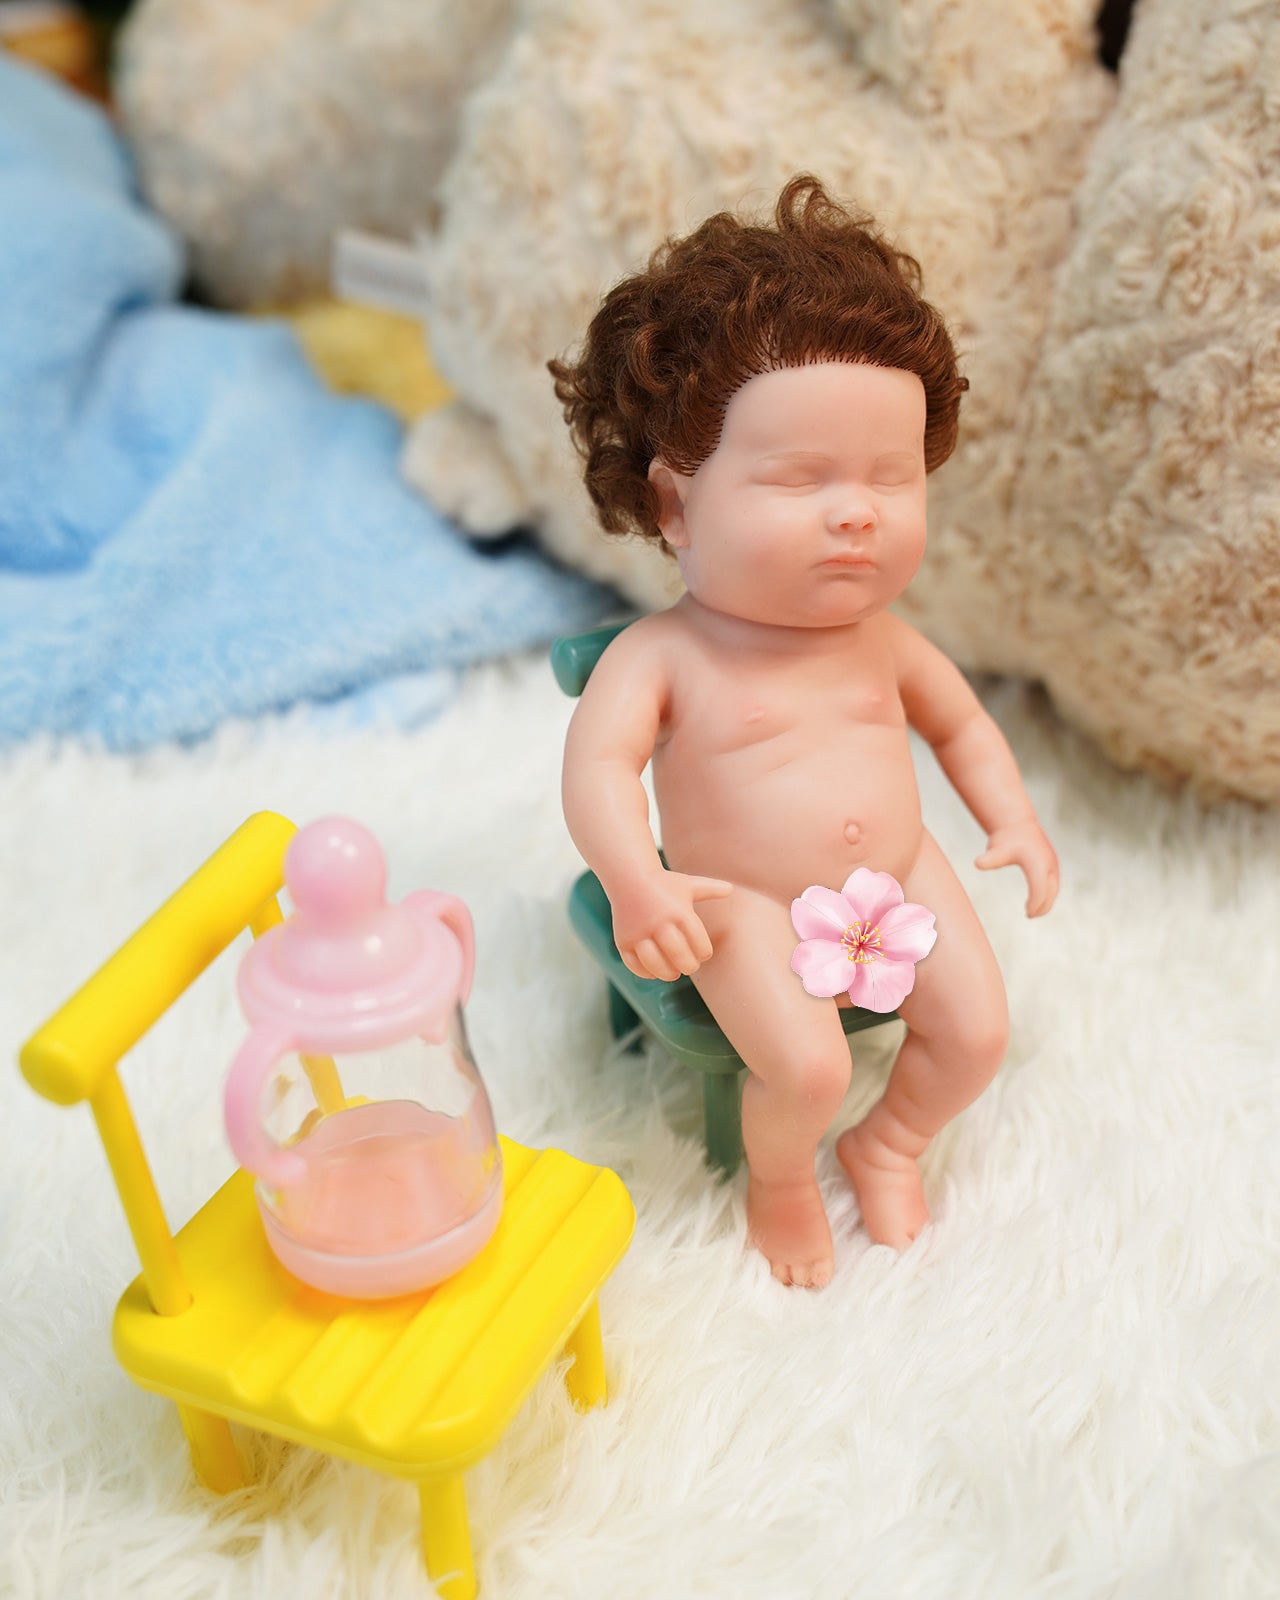 Megan - 8" Full Silicone Reborn Baby Dolls Look Like a Real Newborn Body Boy with Hand-rooted Hair